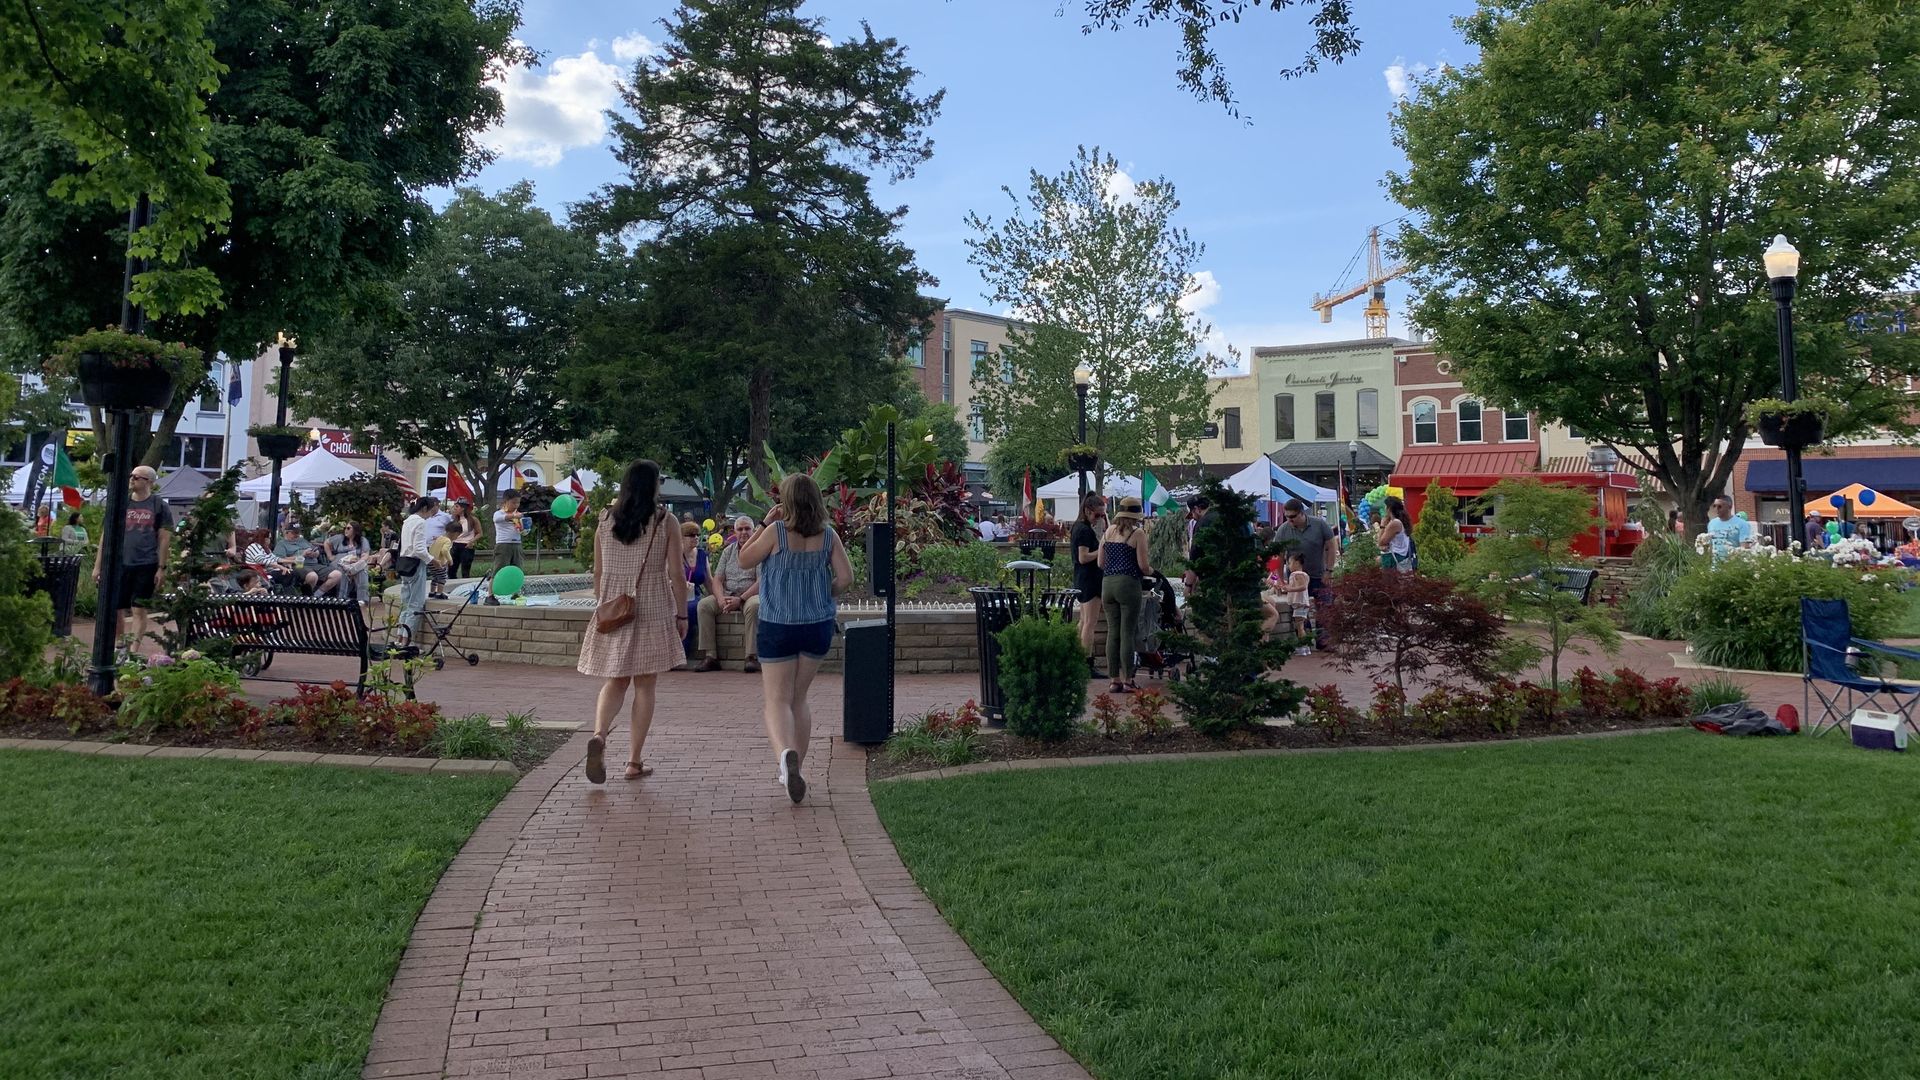 People attend Bentonville's First Friday outside